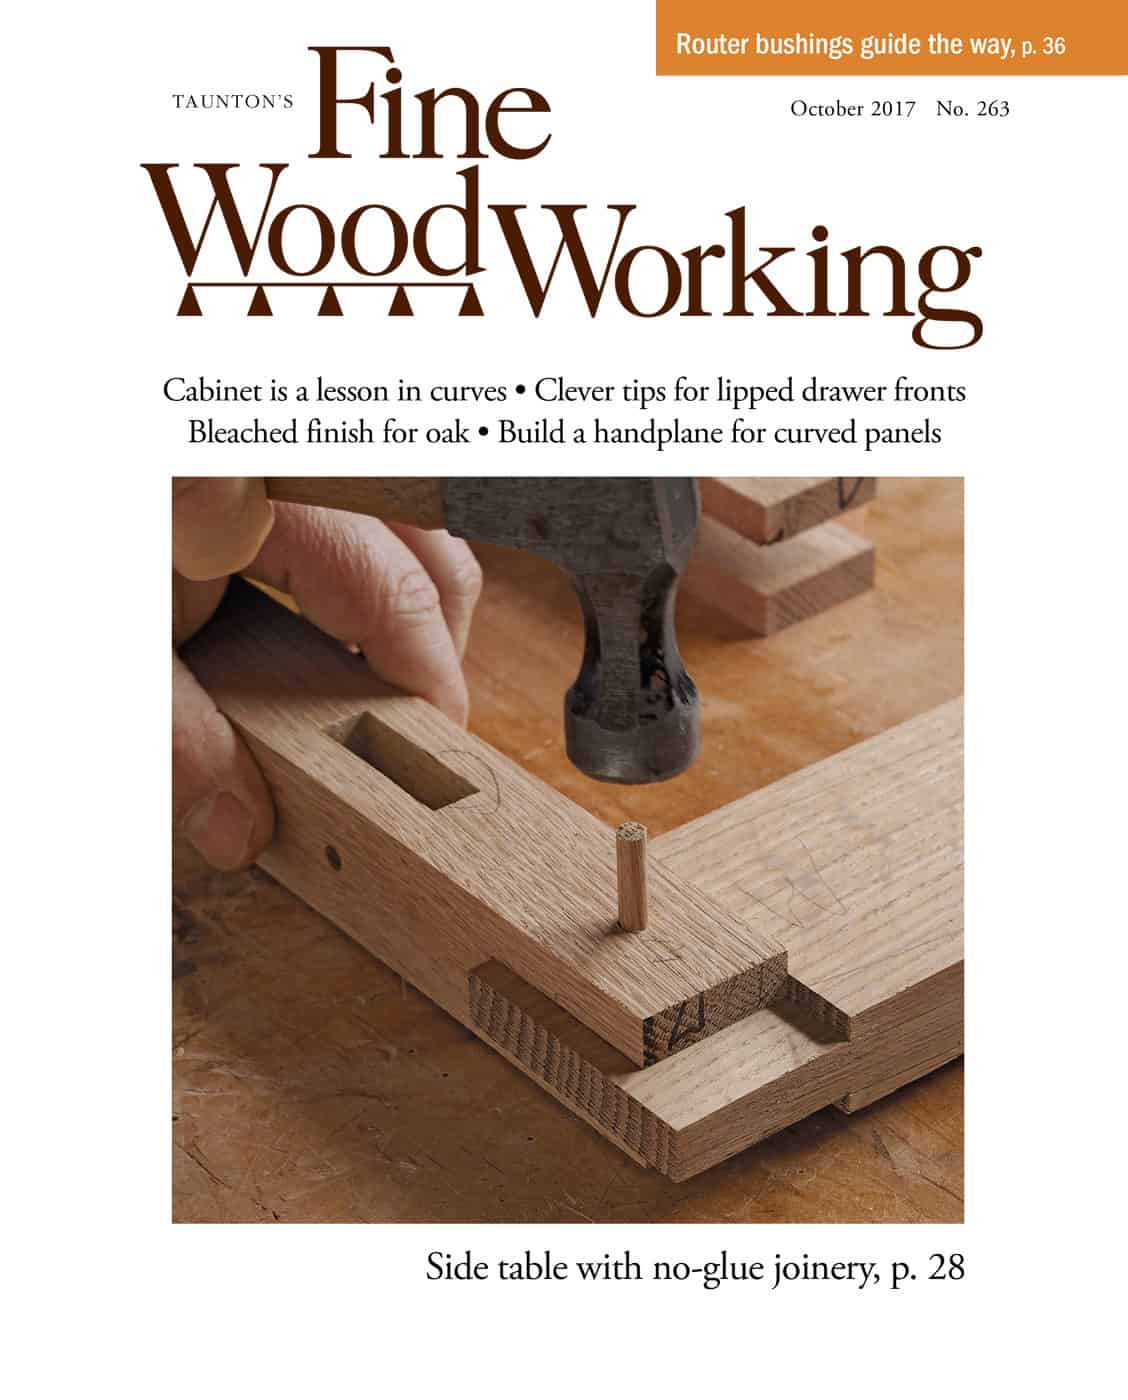 Fine Woodworking Commercial Forest Products